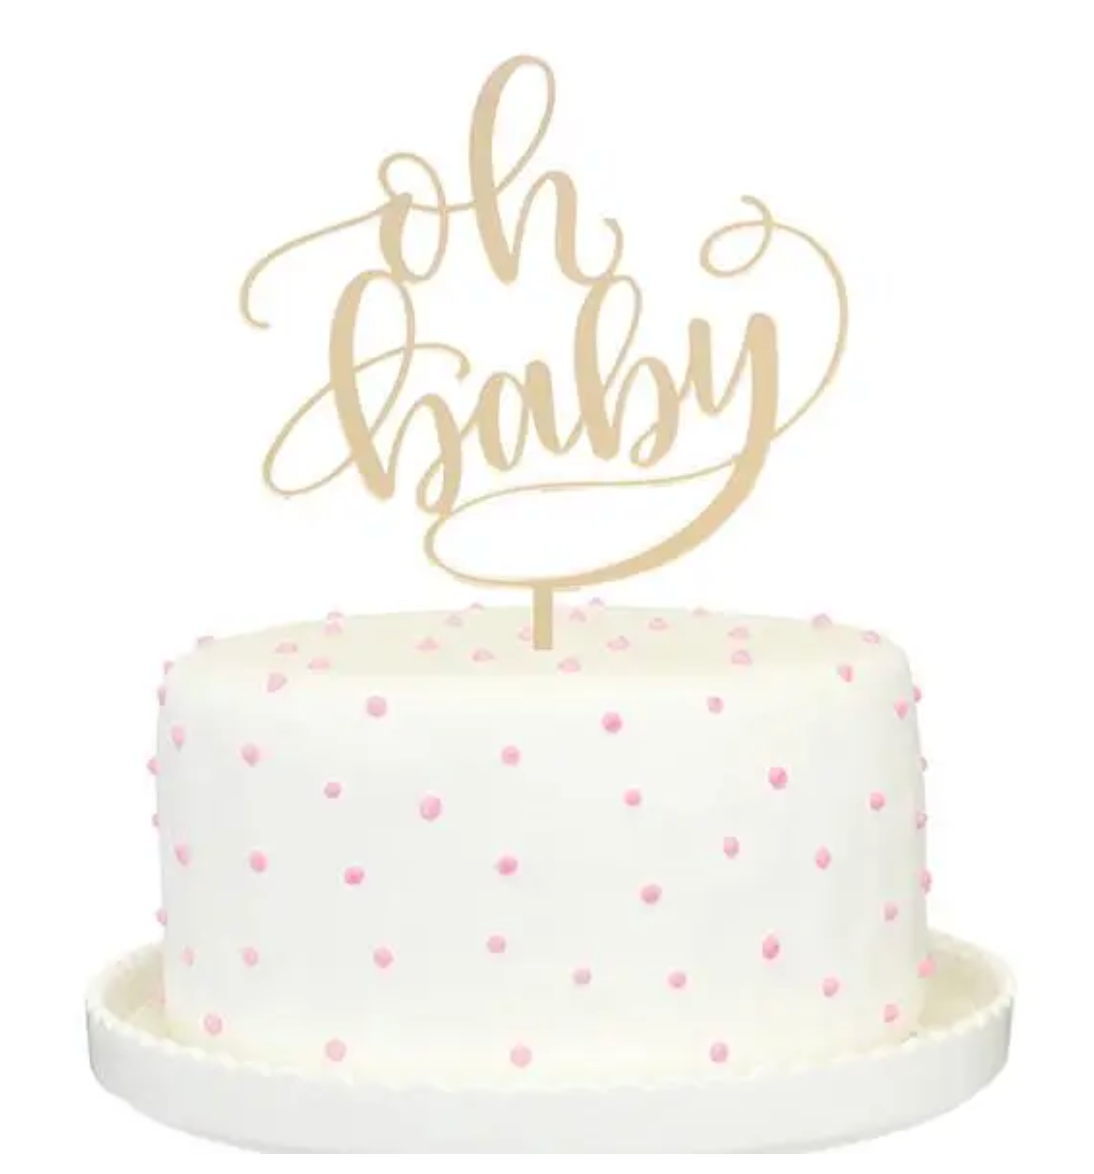 Oh Baby Mirror Deluxe Topper - CJ Gift Shoppe